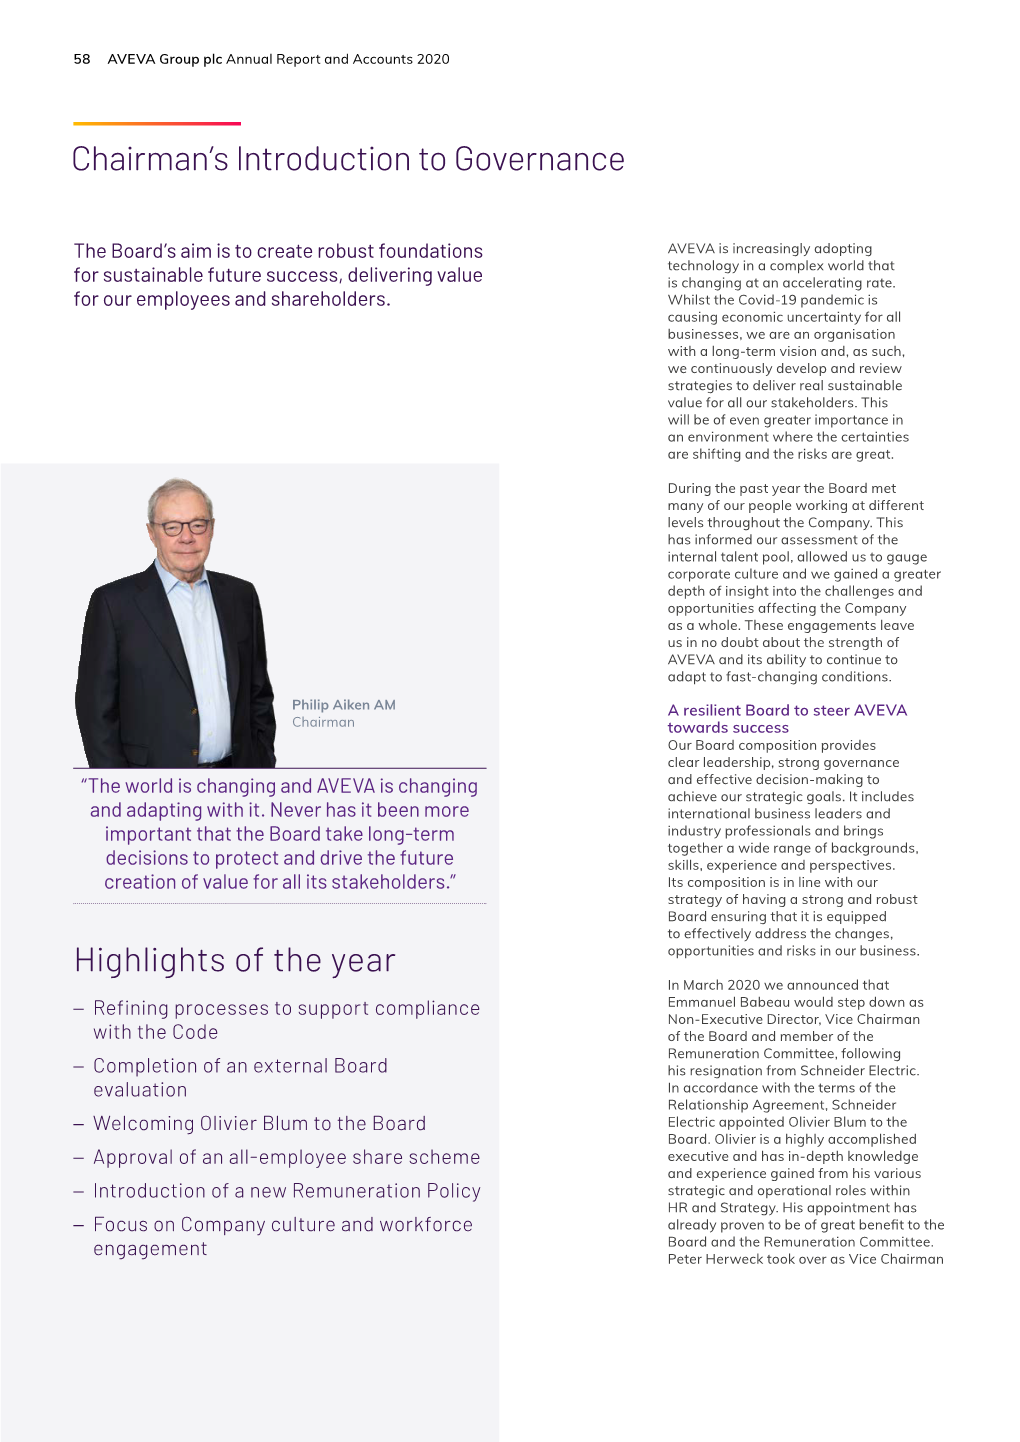 Chairman's Introduction to Governance Highlights of the Year